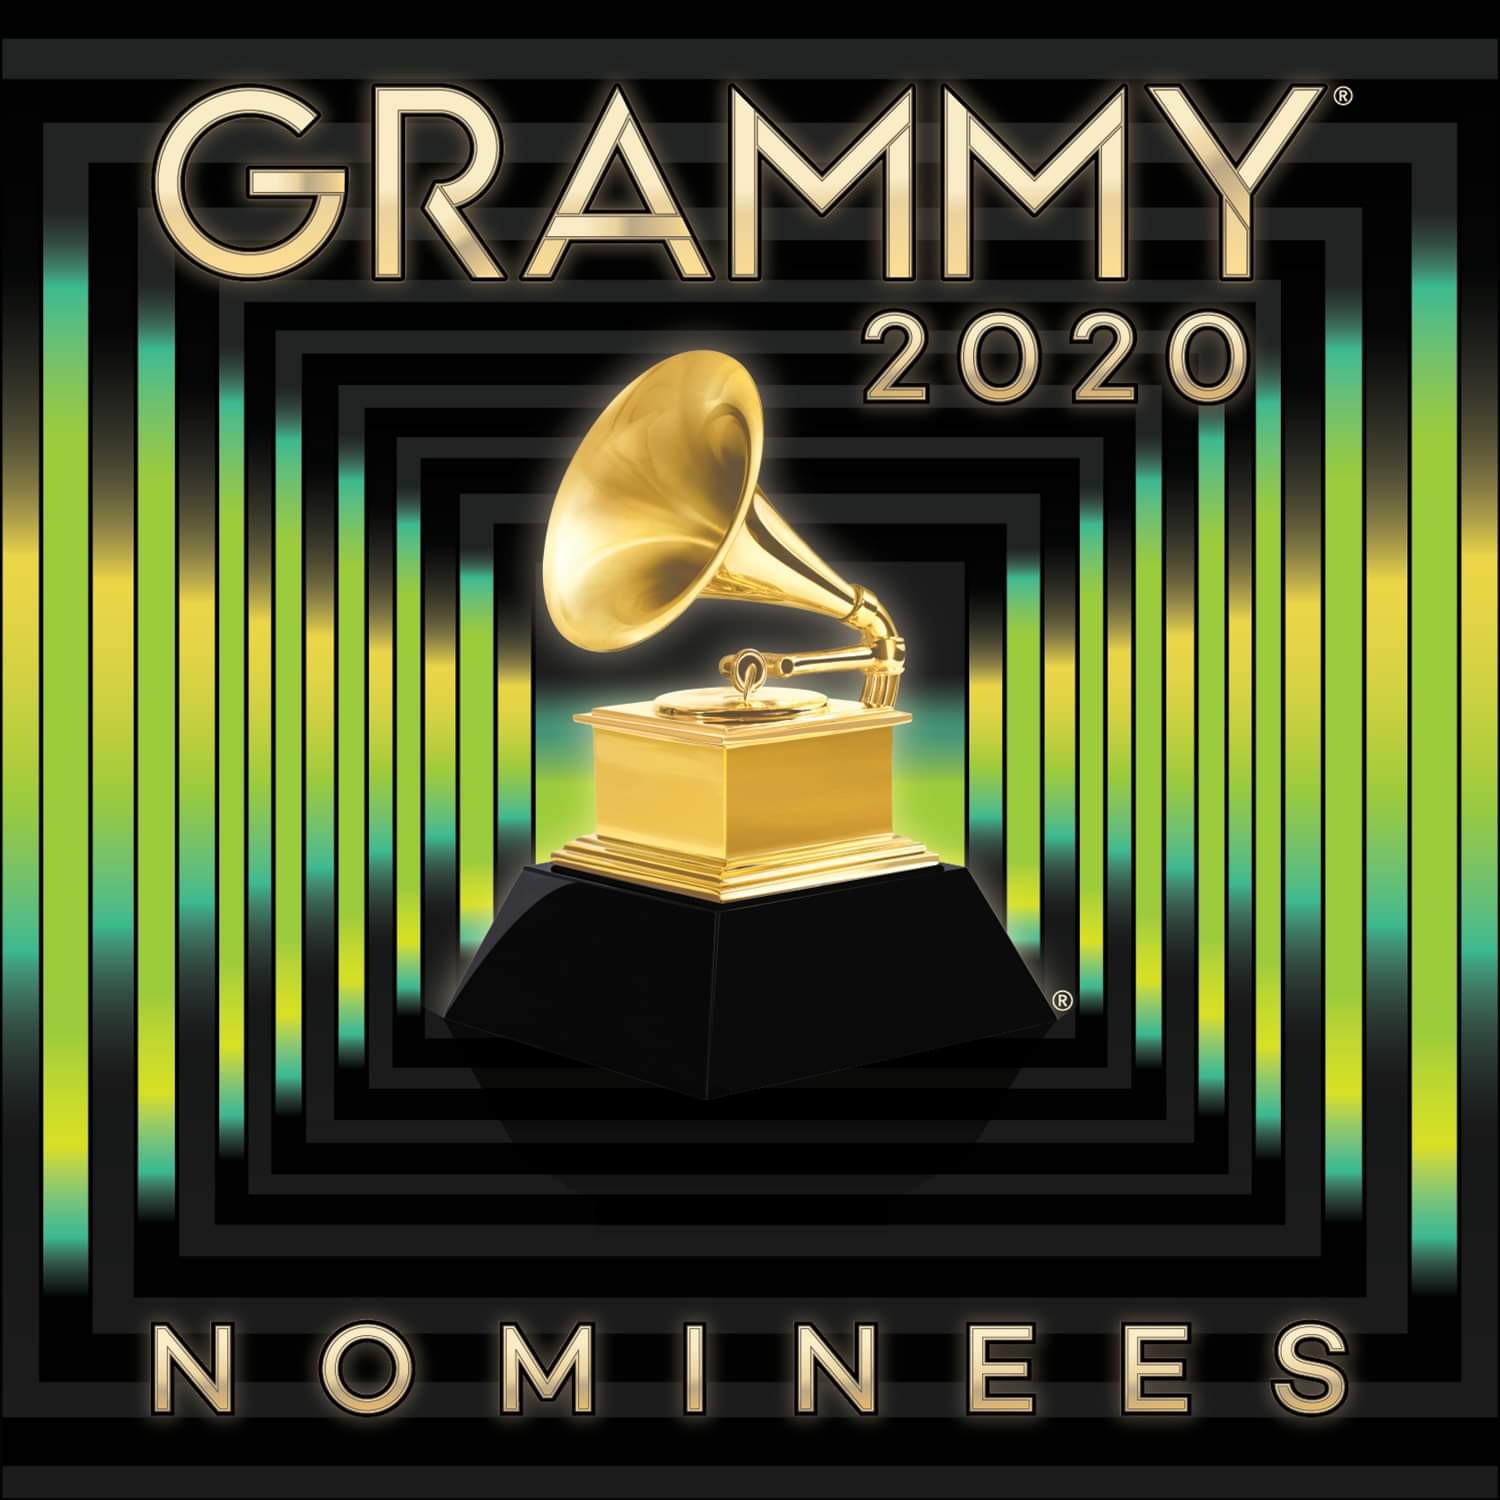 GRAMMY 2020 Nominees Announced, Two Nods For Danny Gokey, Kirk Franklin, for KING & COUNTRY